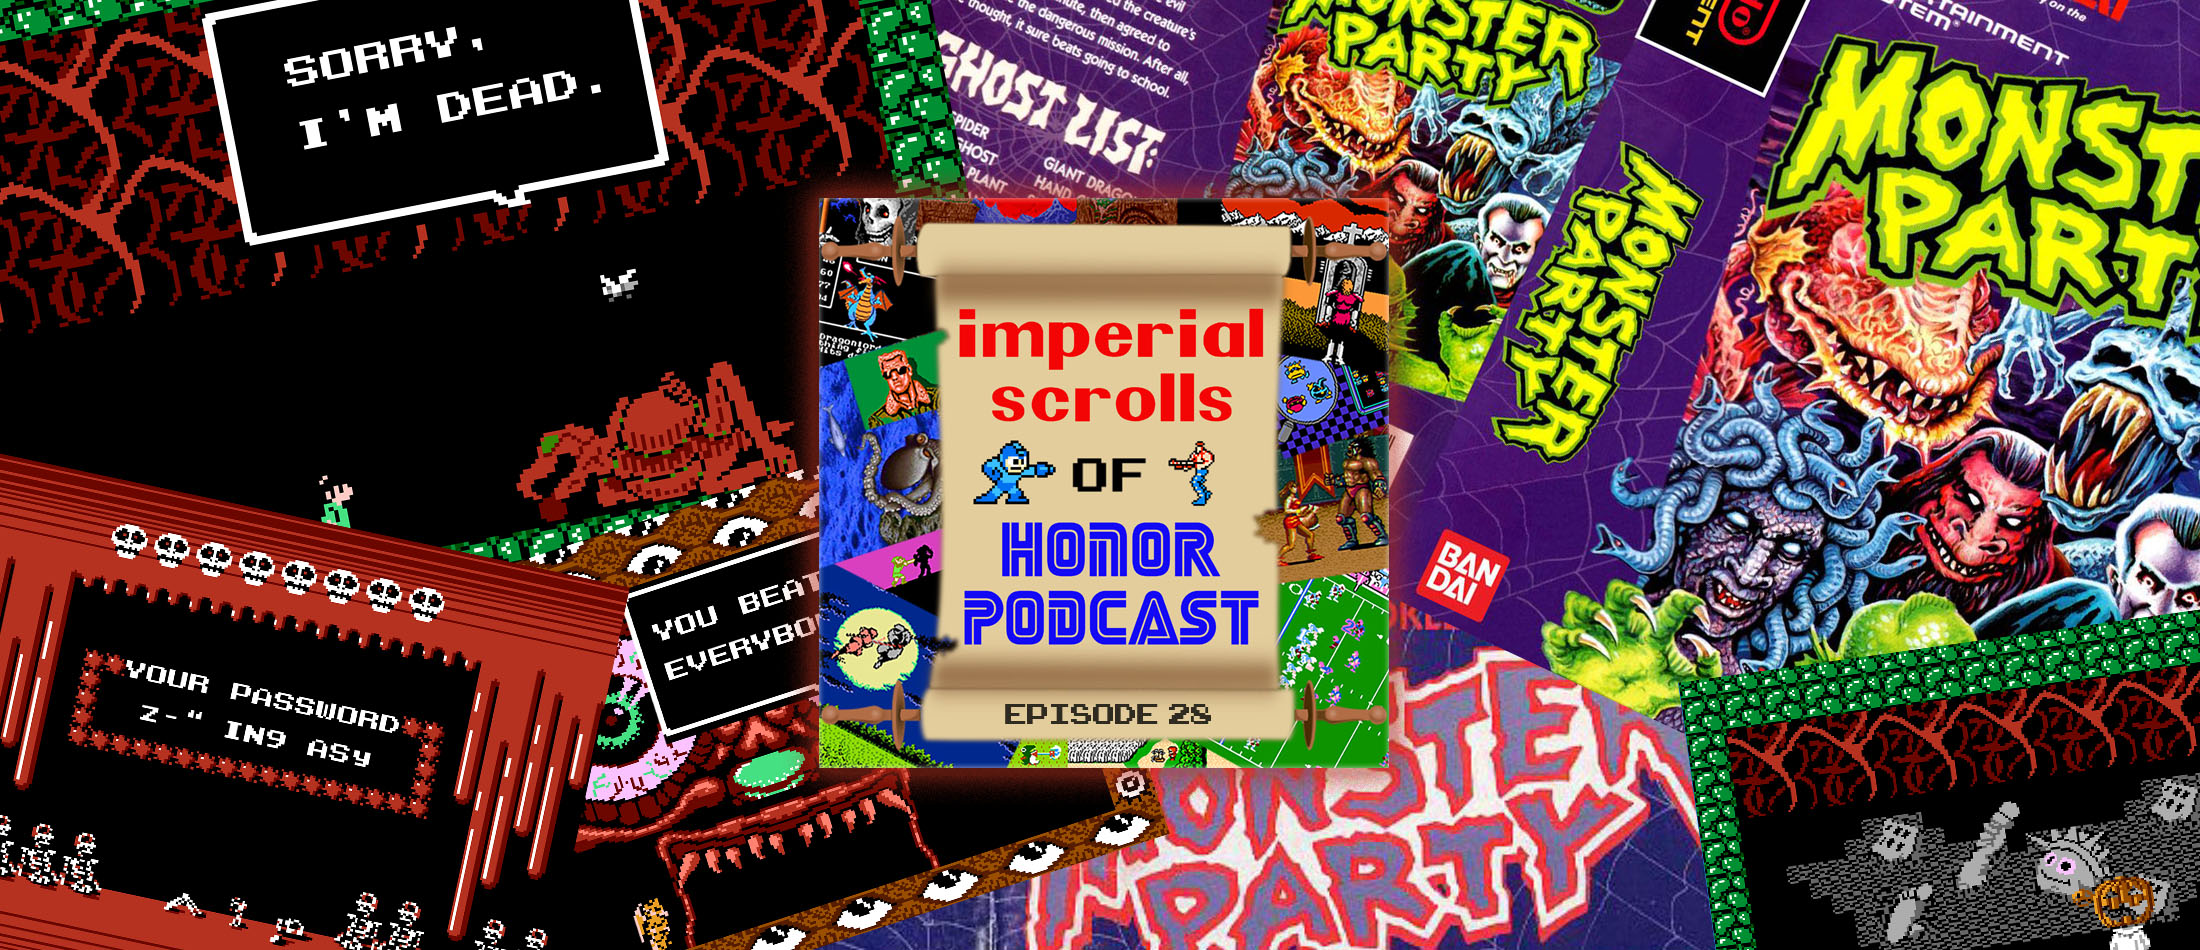 Imperial Scrolls of Honor Podcast - Episode 28 - Monster Party Japanese Prototype (NES)